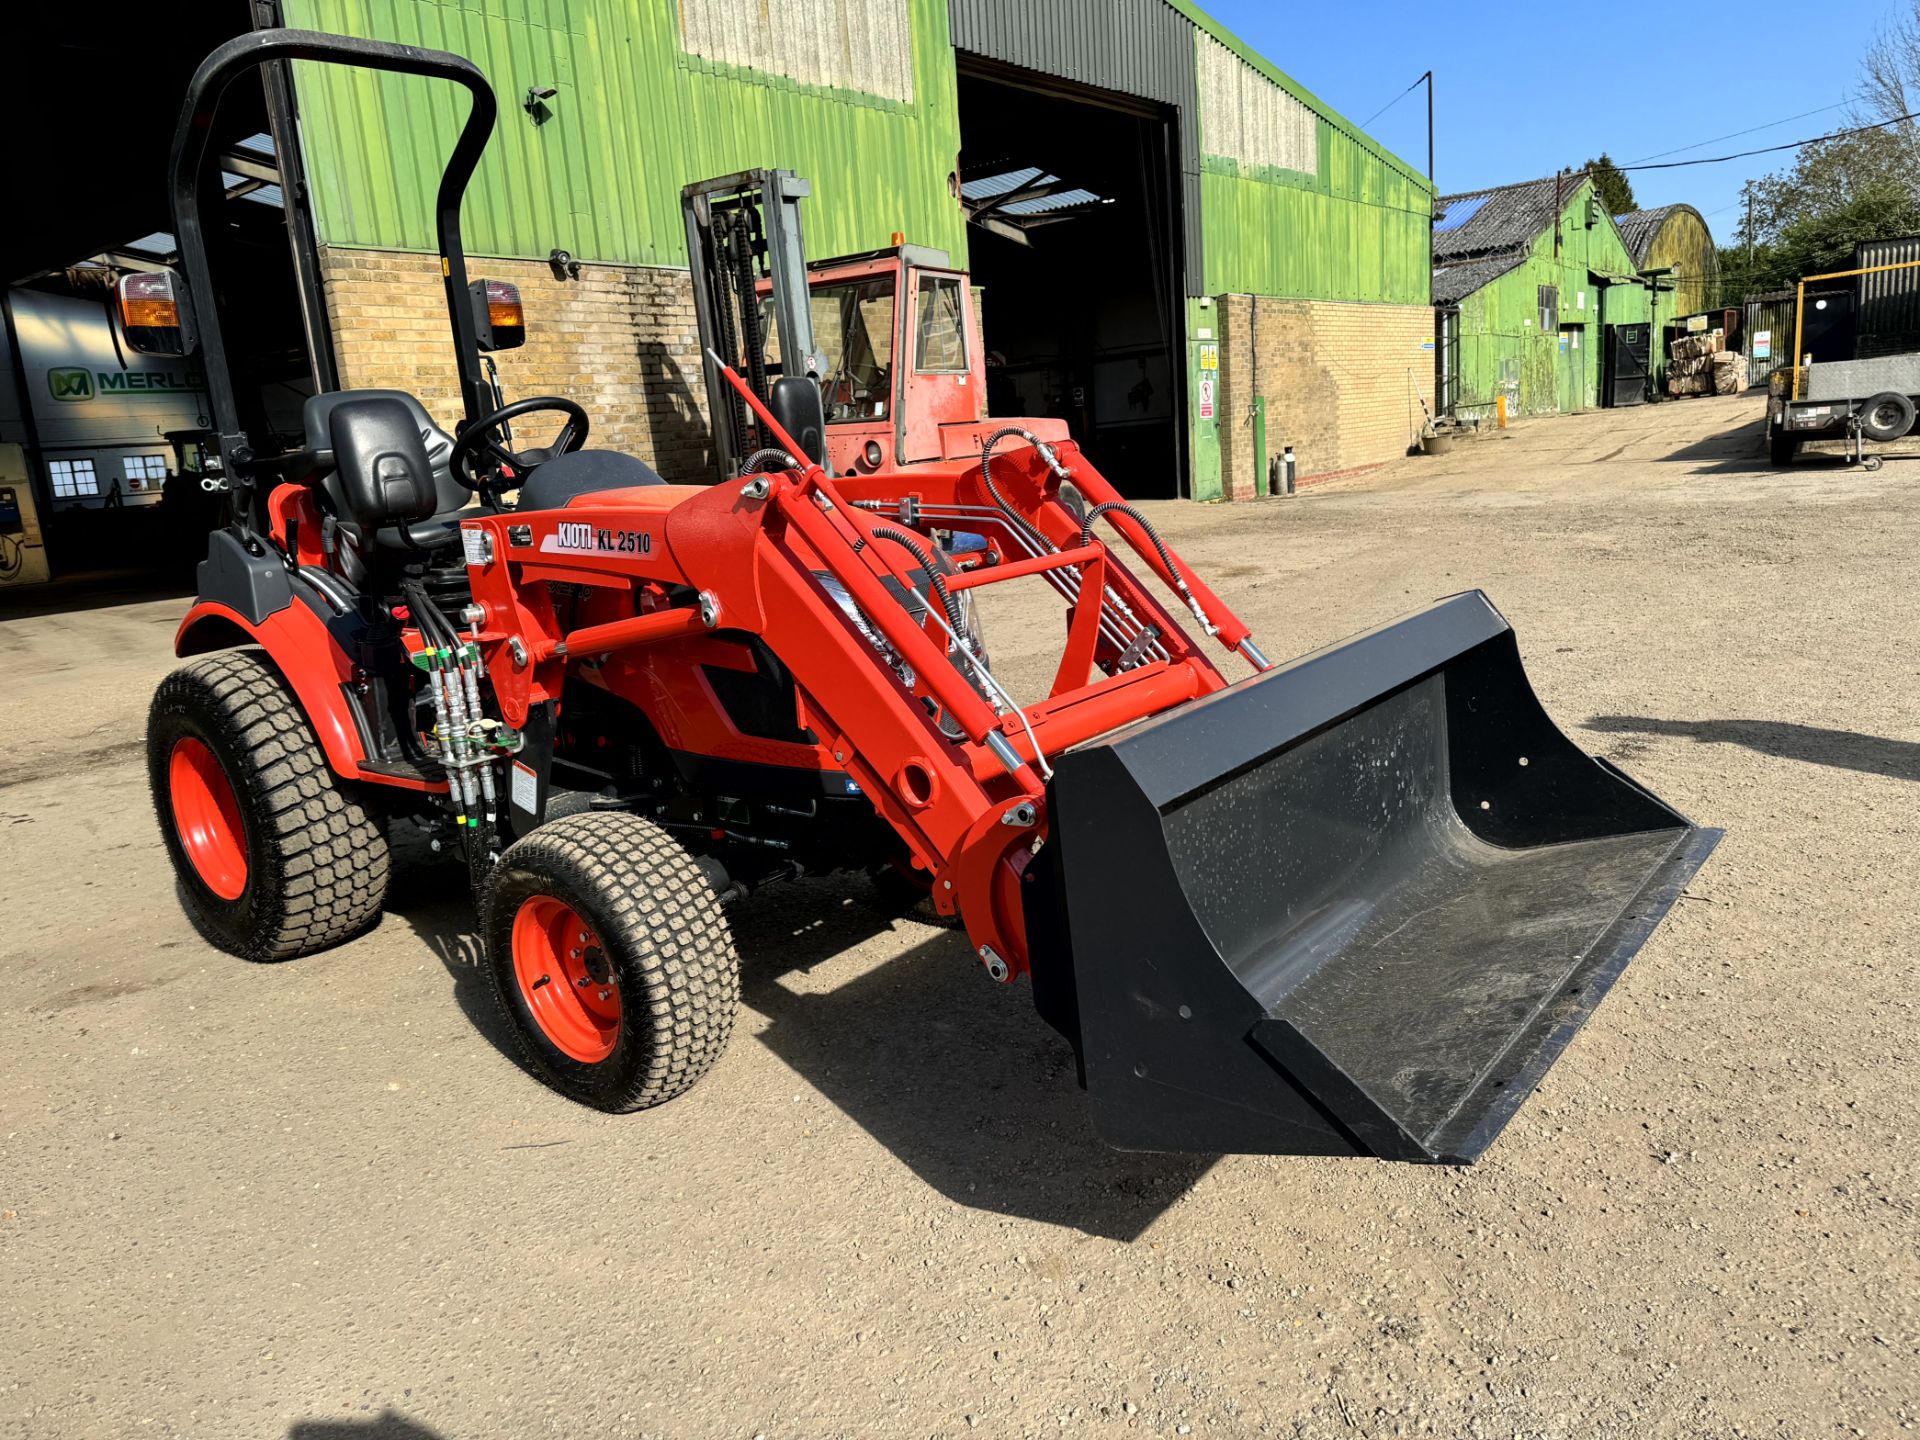 1: Kioti CX2510 HST, 4WD Compact Tractor SR-TB130 On Grassland Tyres With Kioti KL2510 HST Front Lo